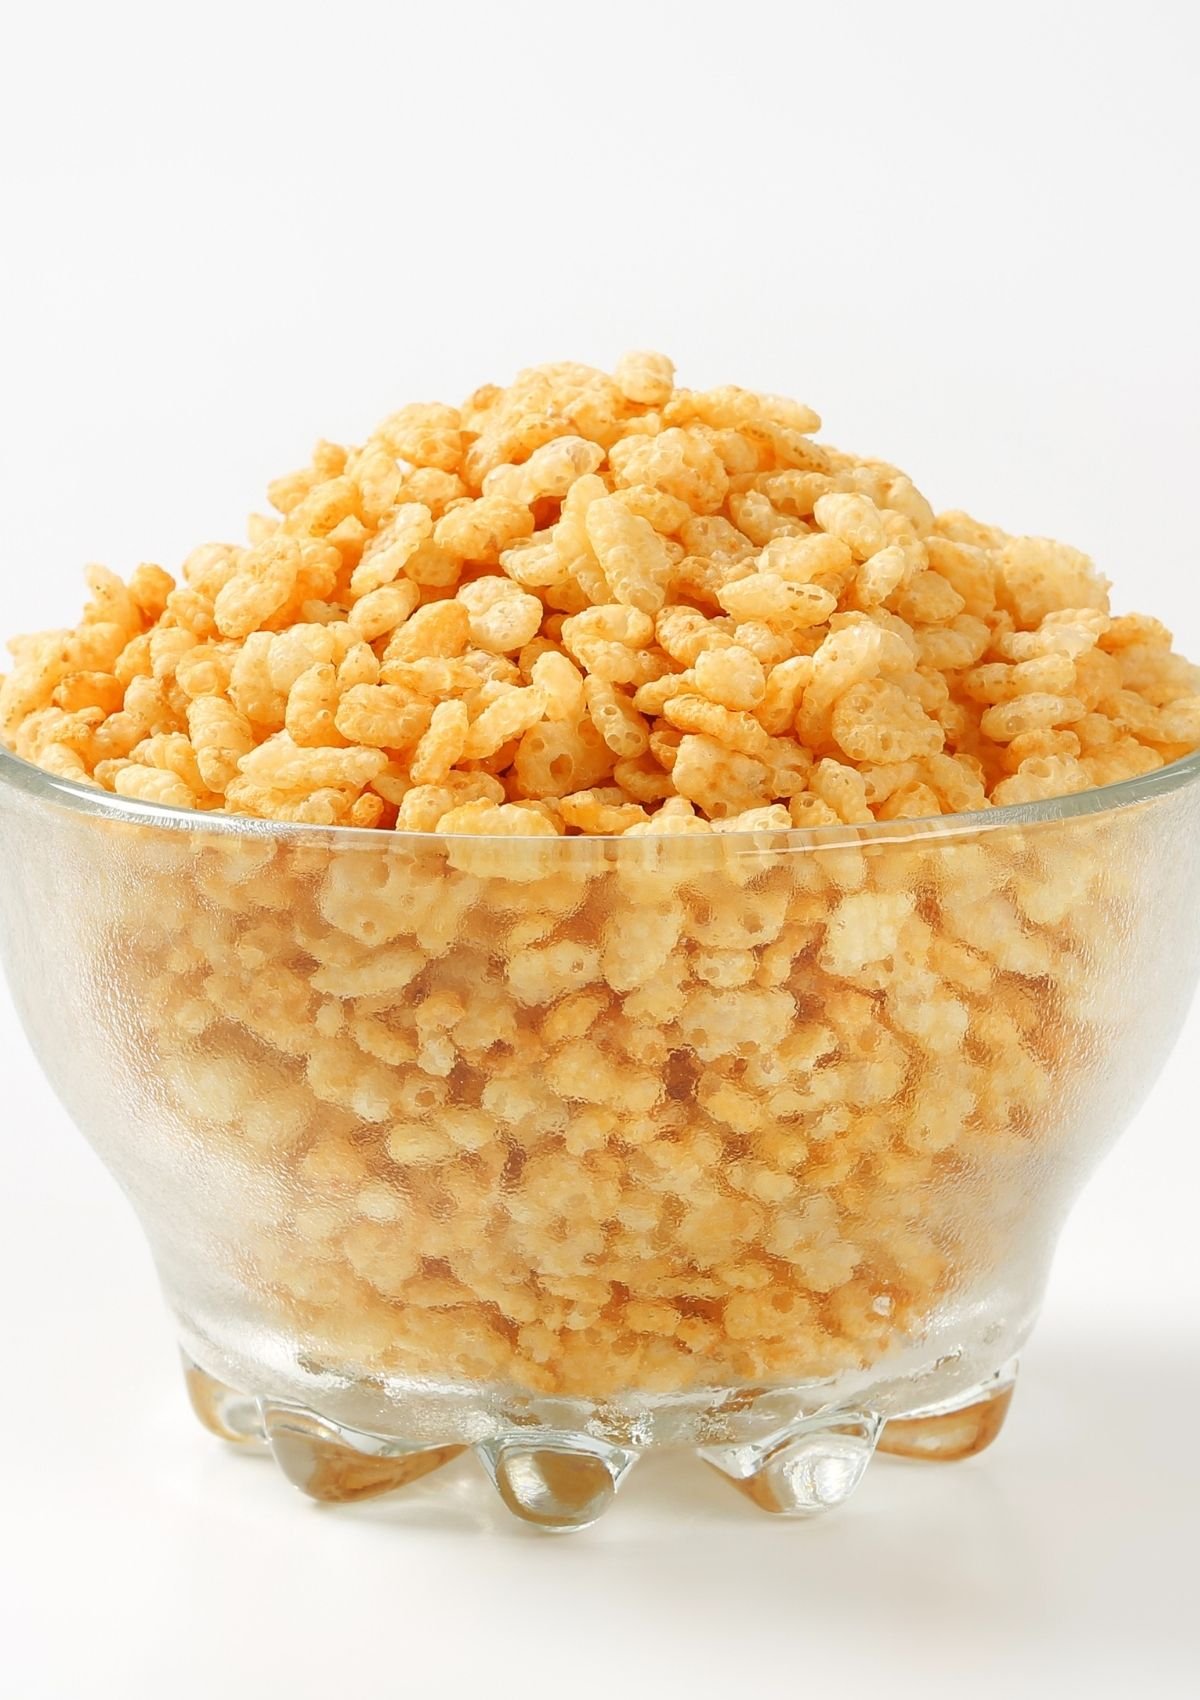 Rice cereal in glass bowl.